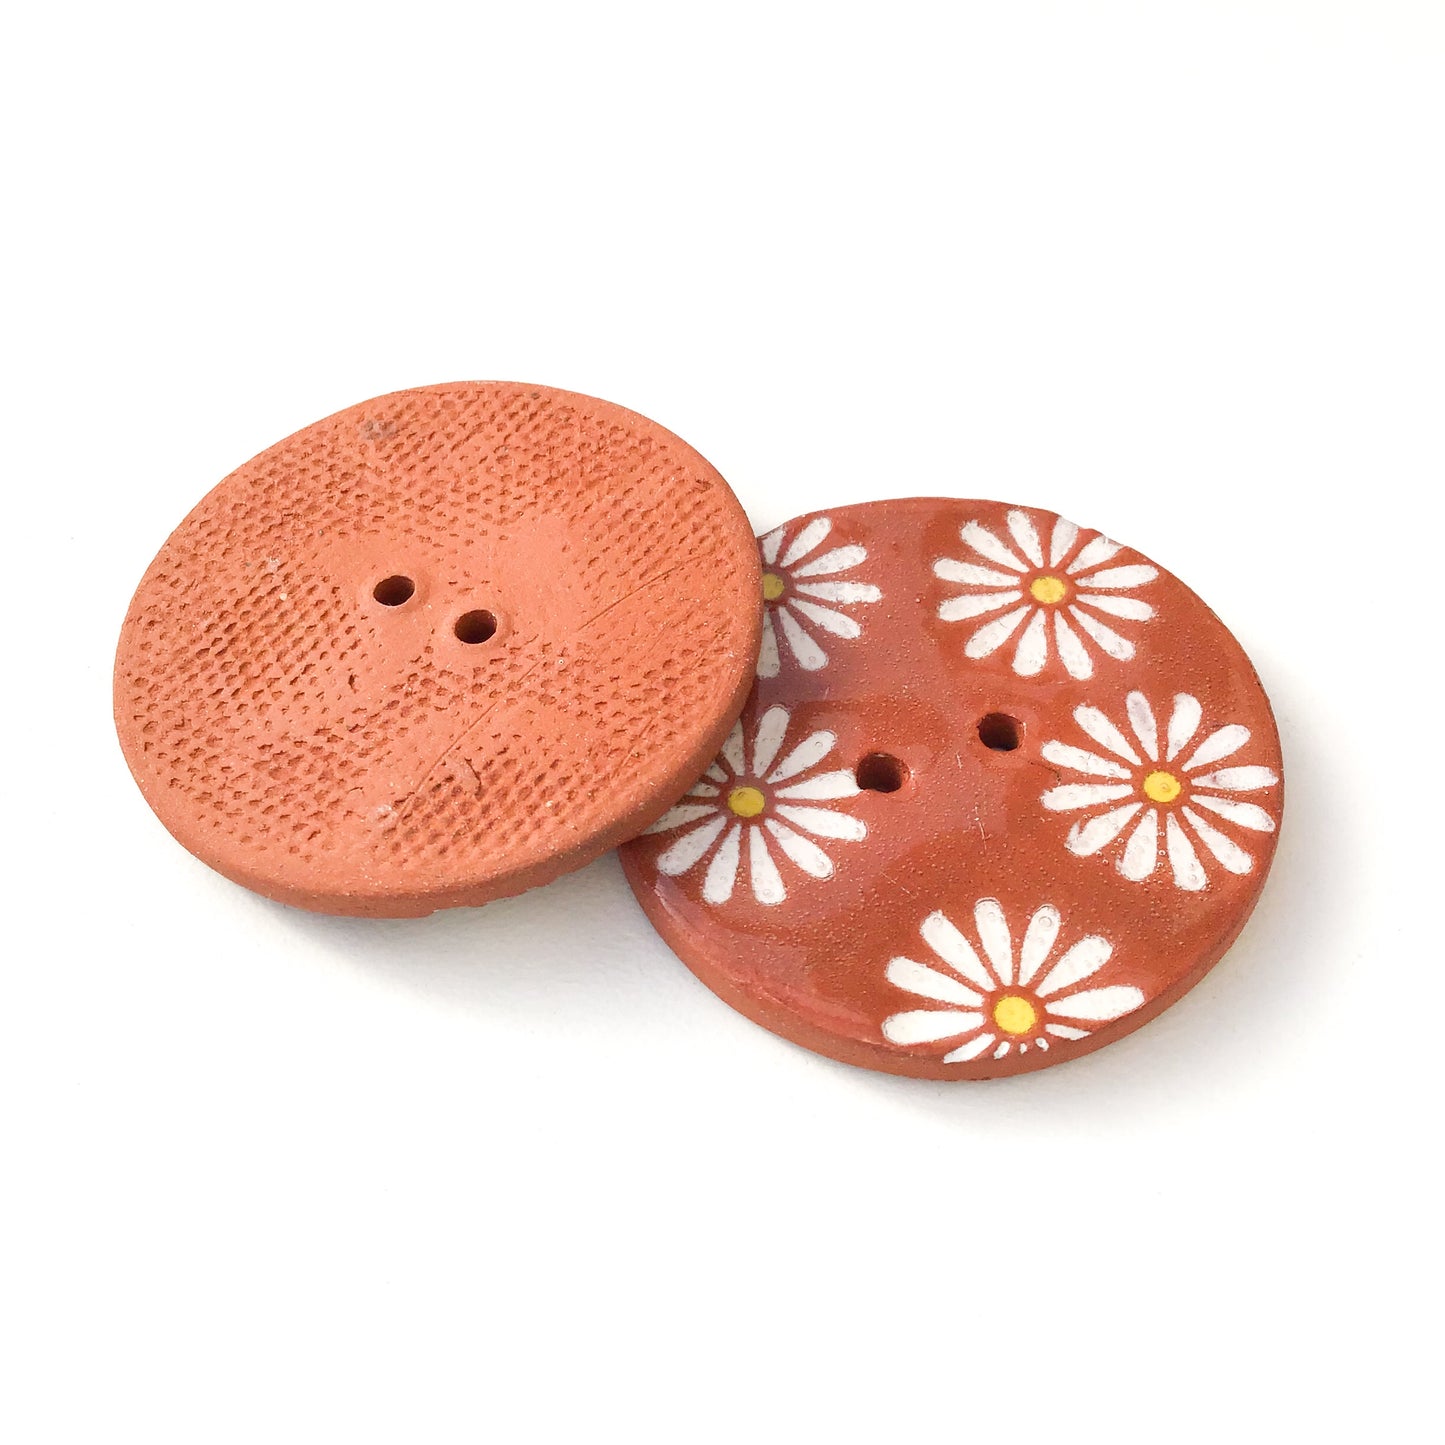 White Daisy Button on Red Clay - 1 3/8"